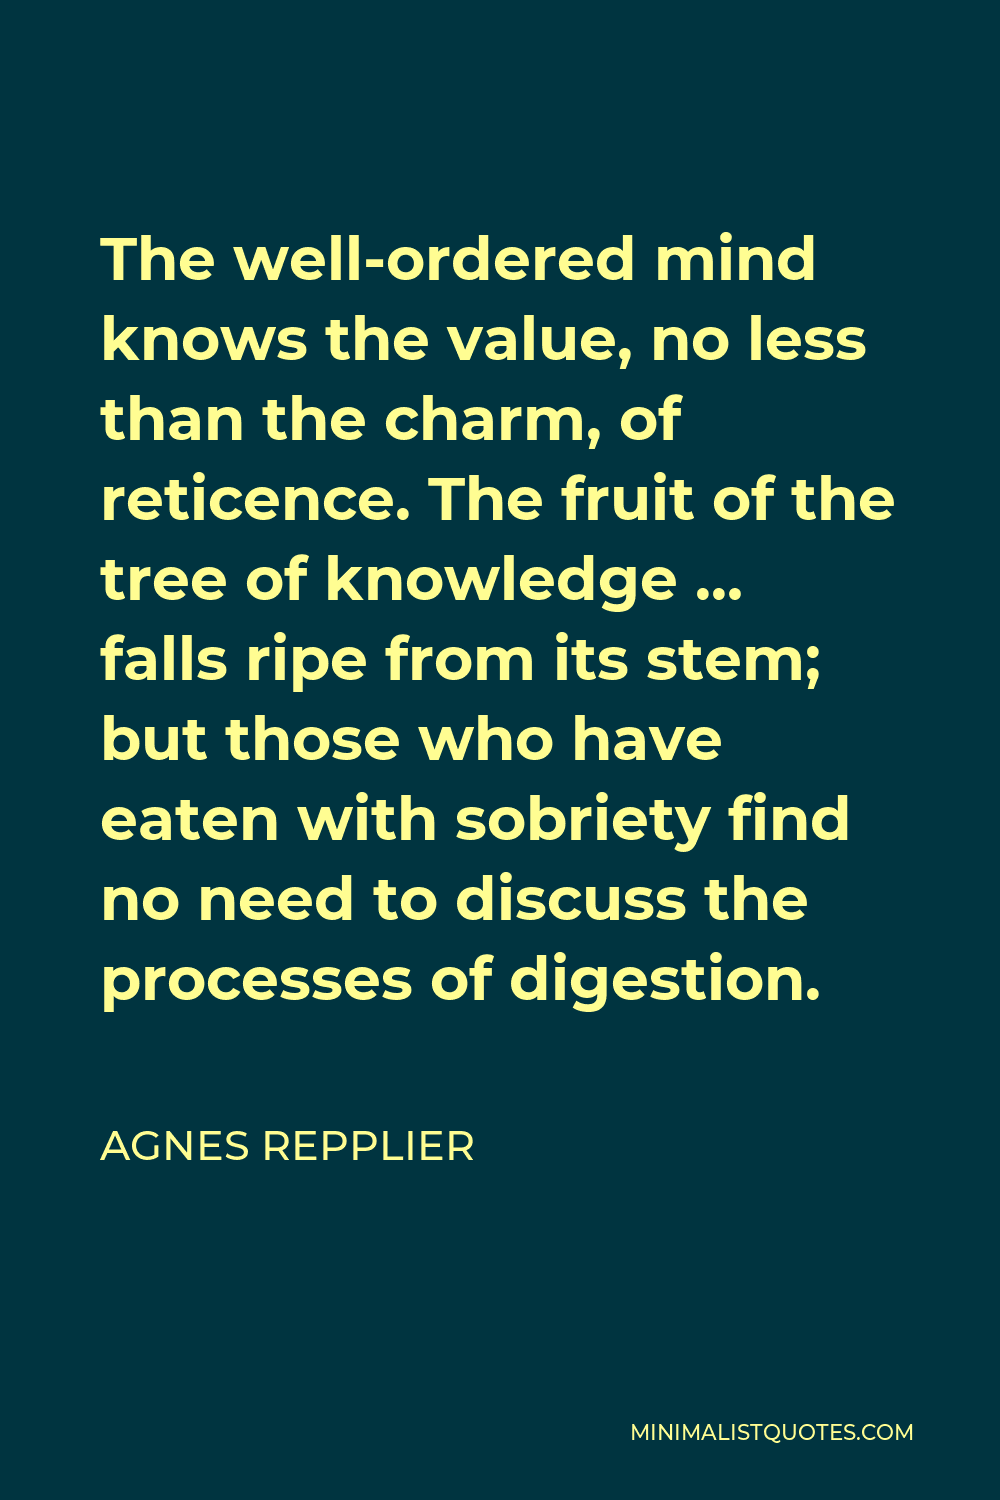 Agnes Repplier Quote - The well-ordered mind knows the value, no less than the charm, of reticence. The fruit of the tree of knowledge … falls ripe from its stem; but those who have eaten with sobriety find no need to discuss the processes of digestion.